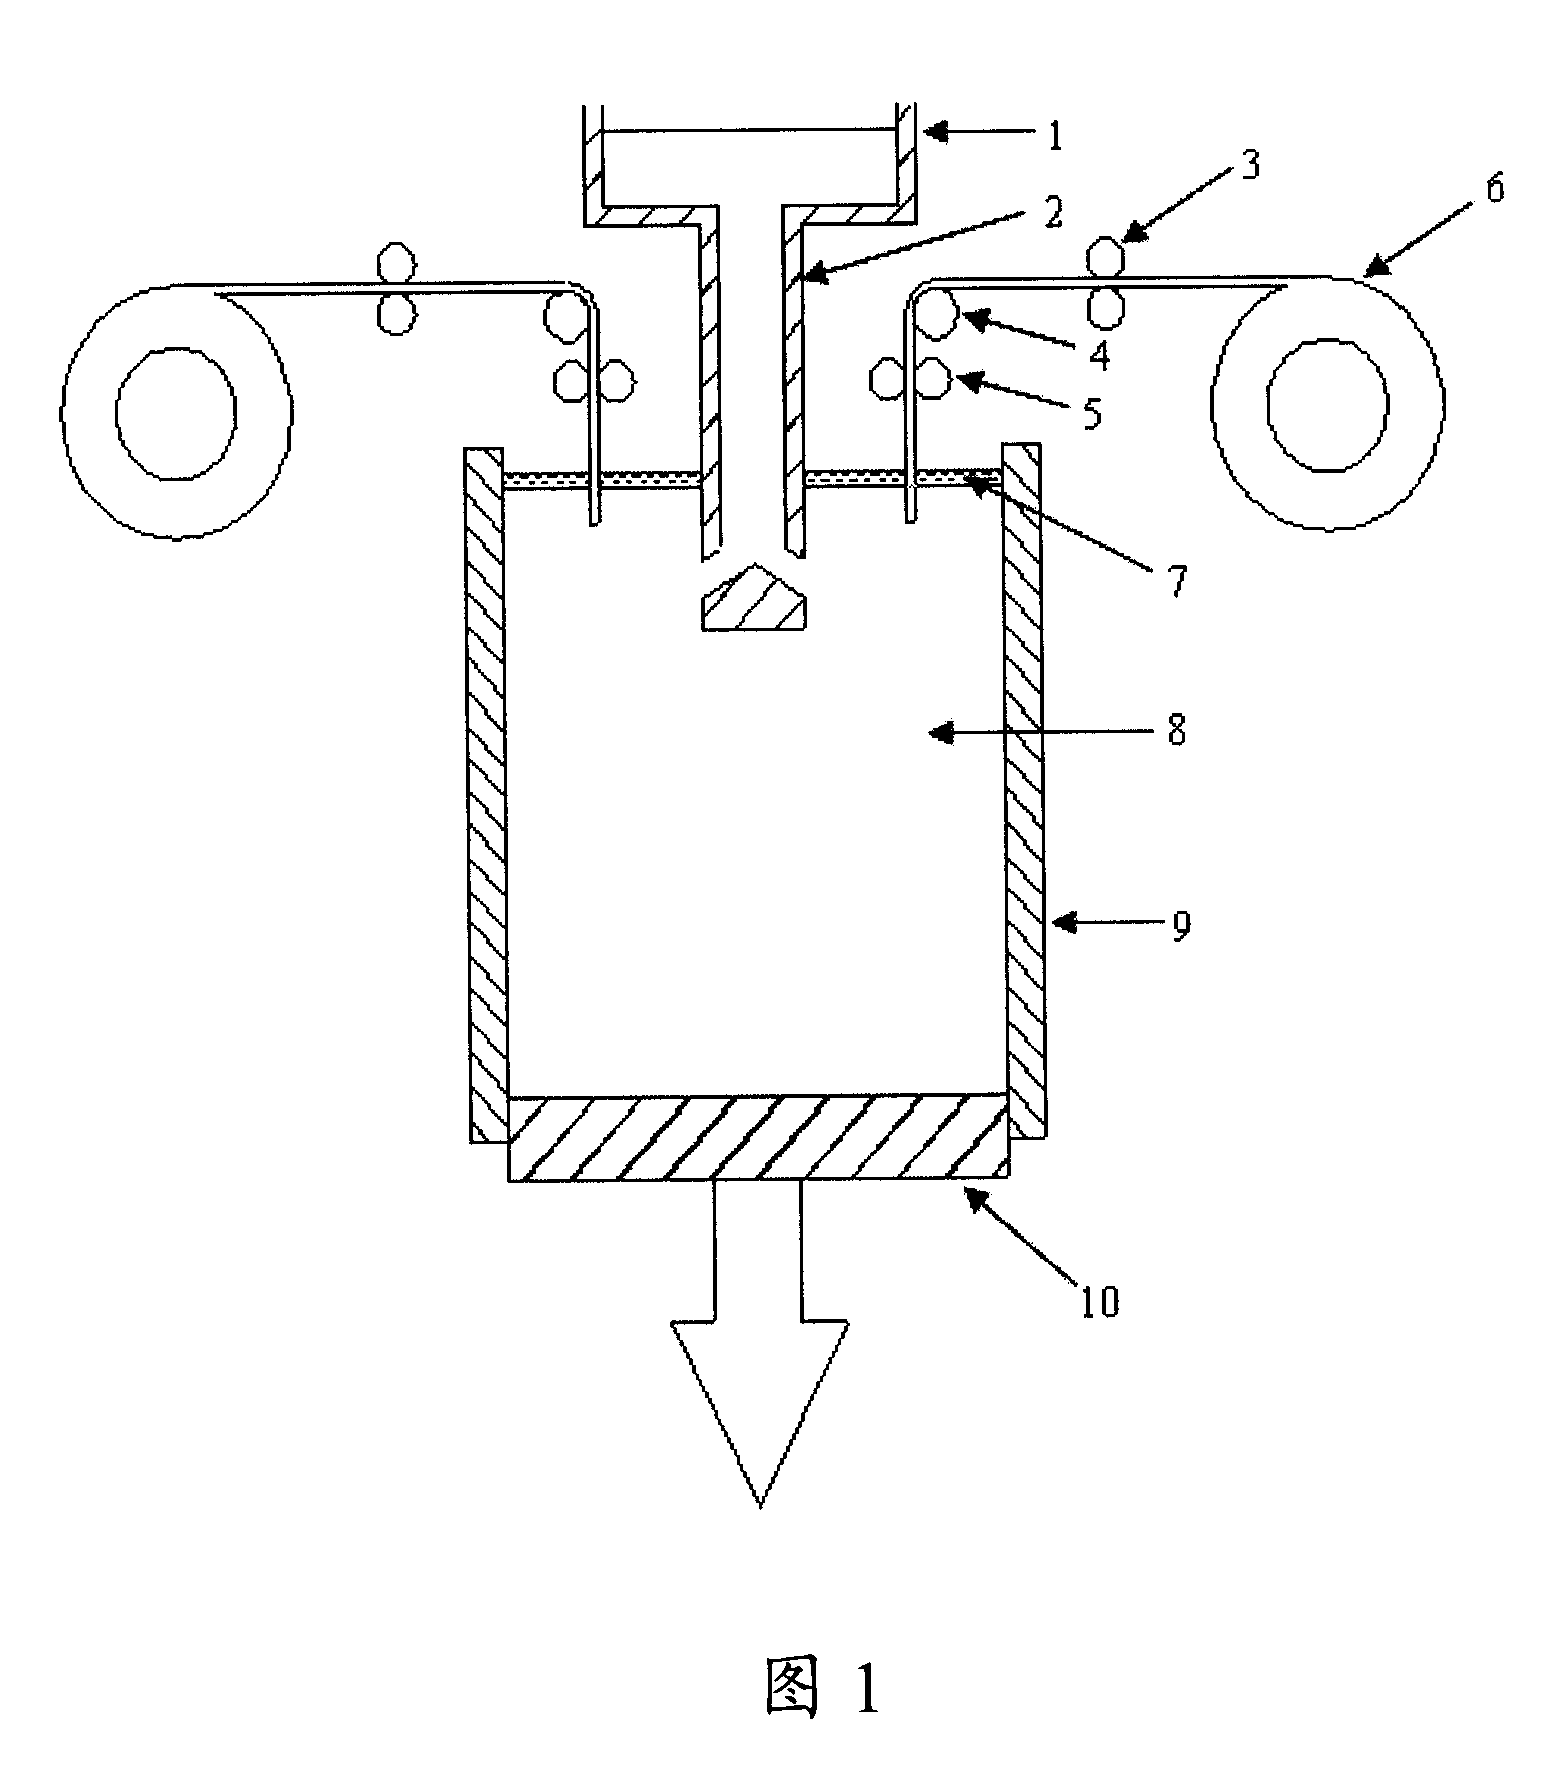 Continuous casting crystallizer capable of controlling liquid level flow field and wave motion